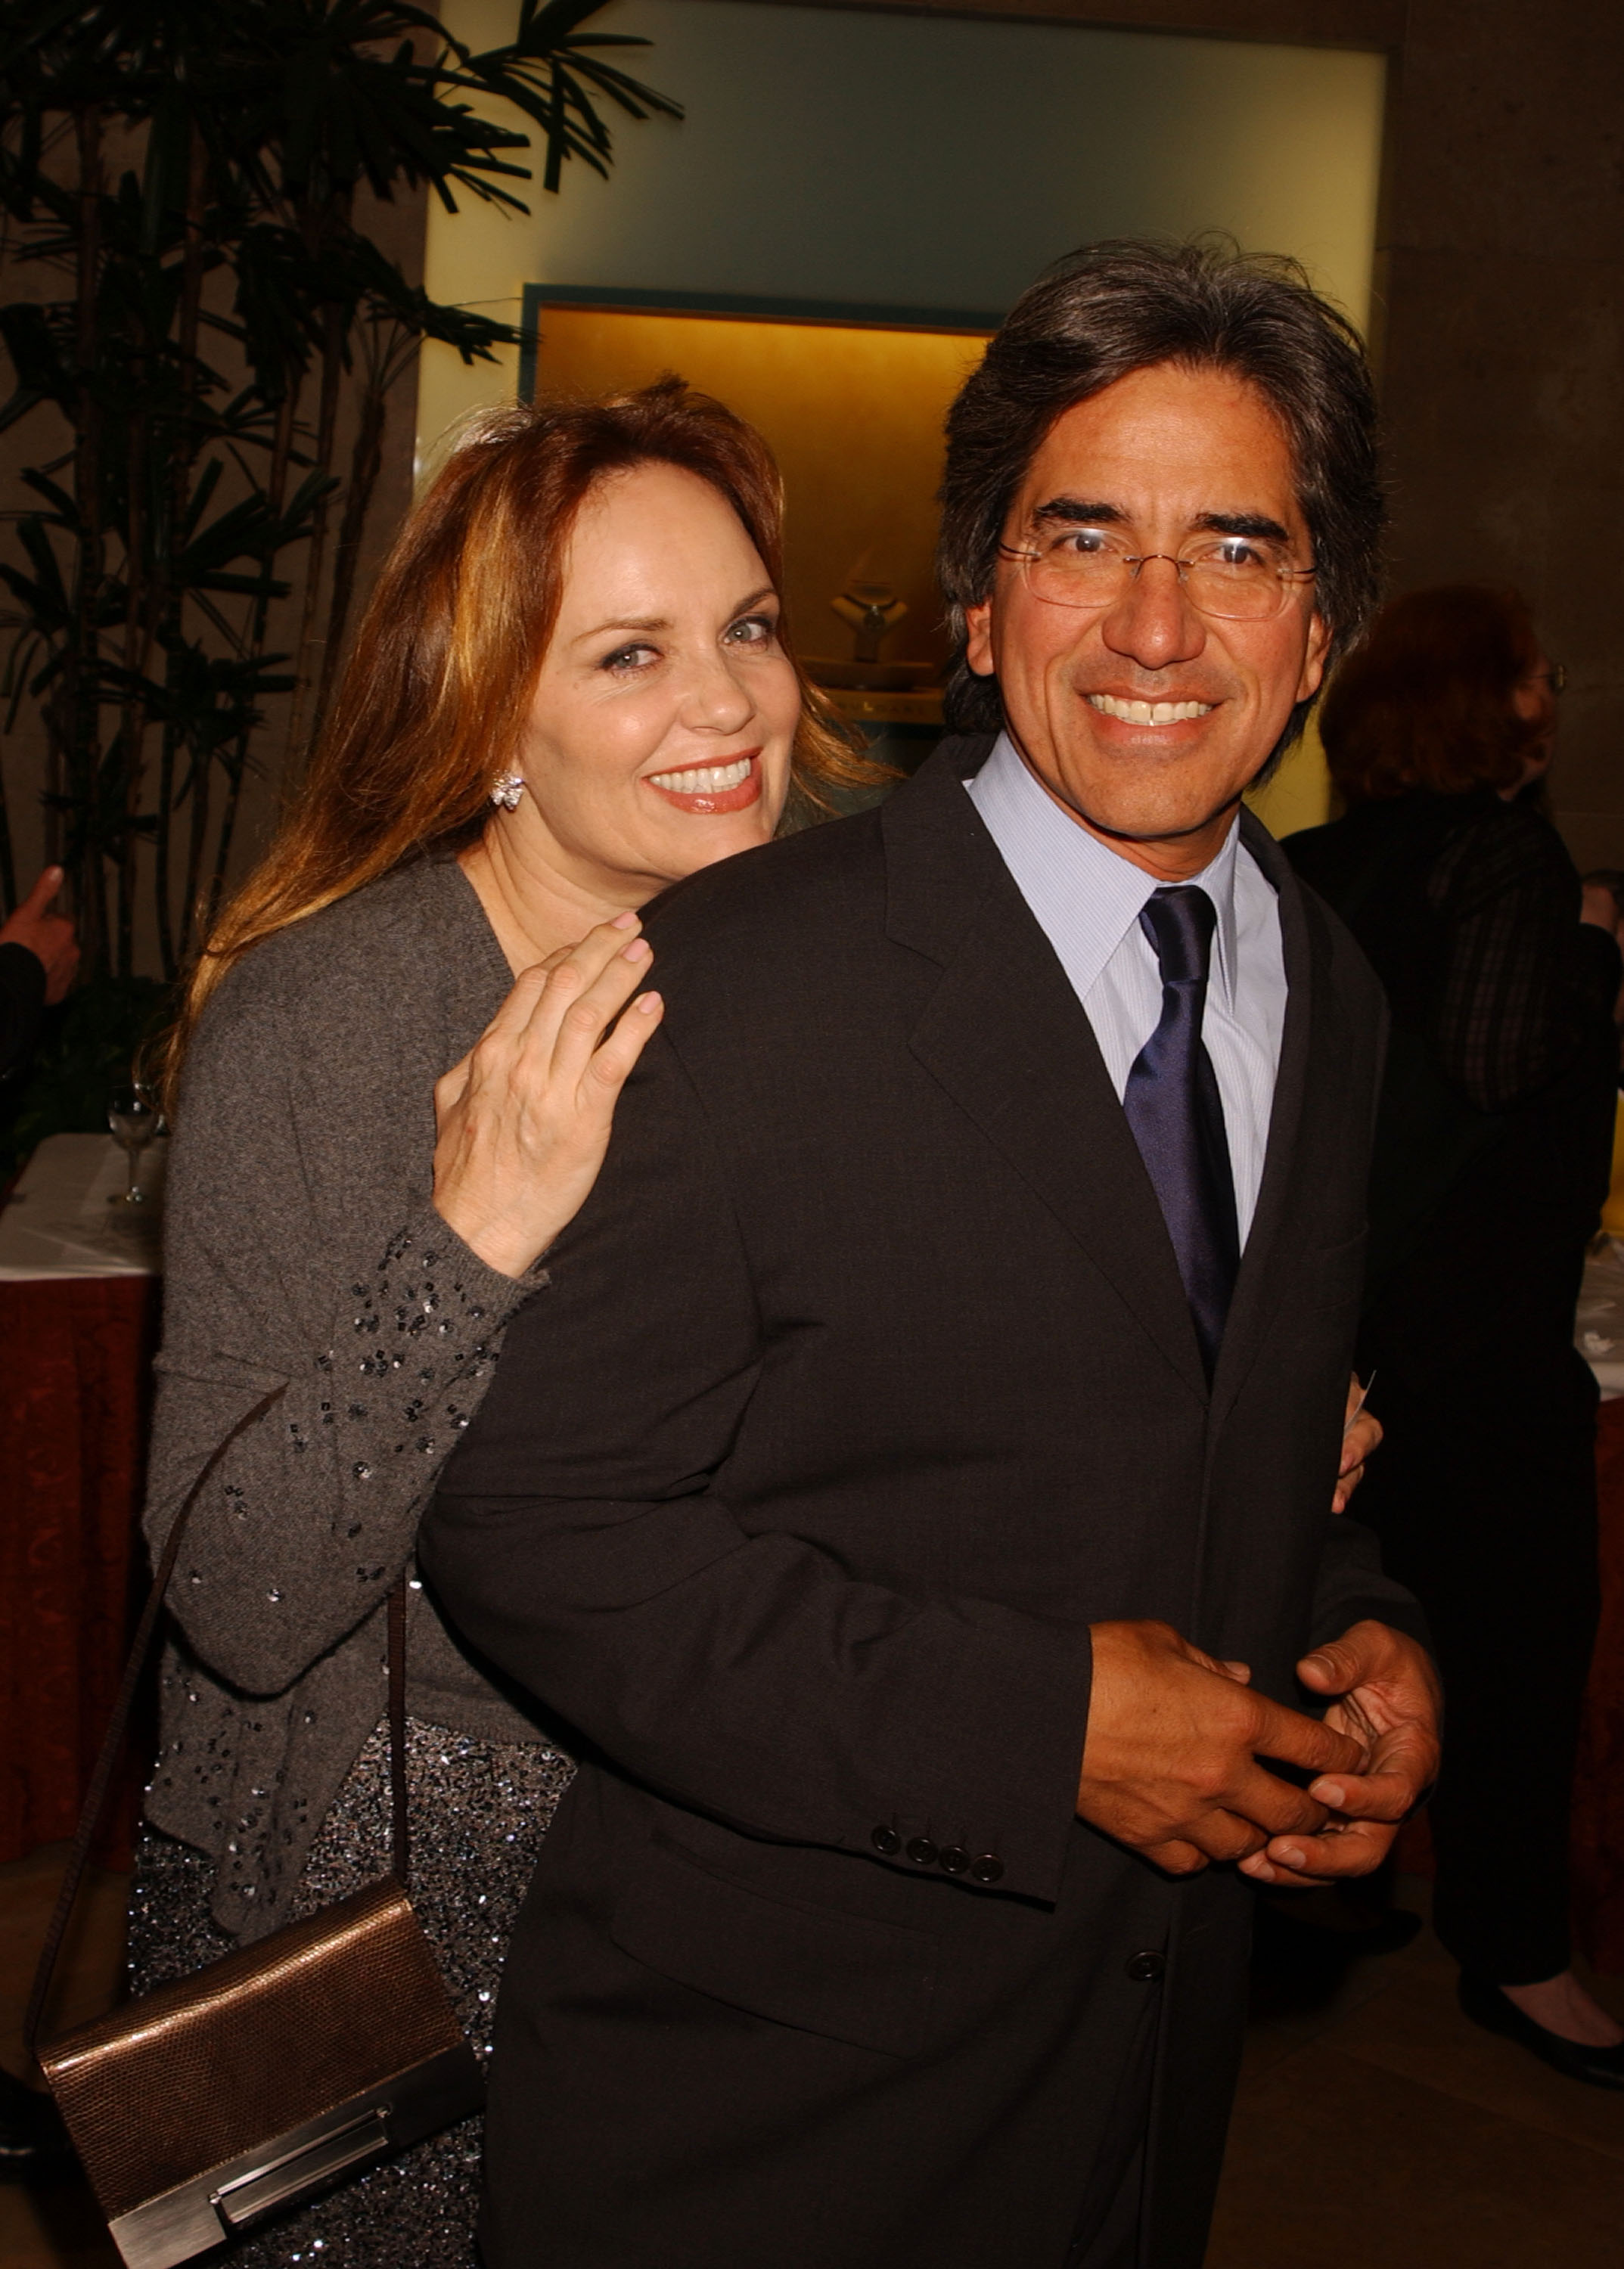 Catherine Bach poses candidly alongside her husband, Peter Lopez, in March 2002. | Source: Getty Images